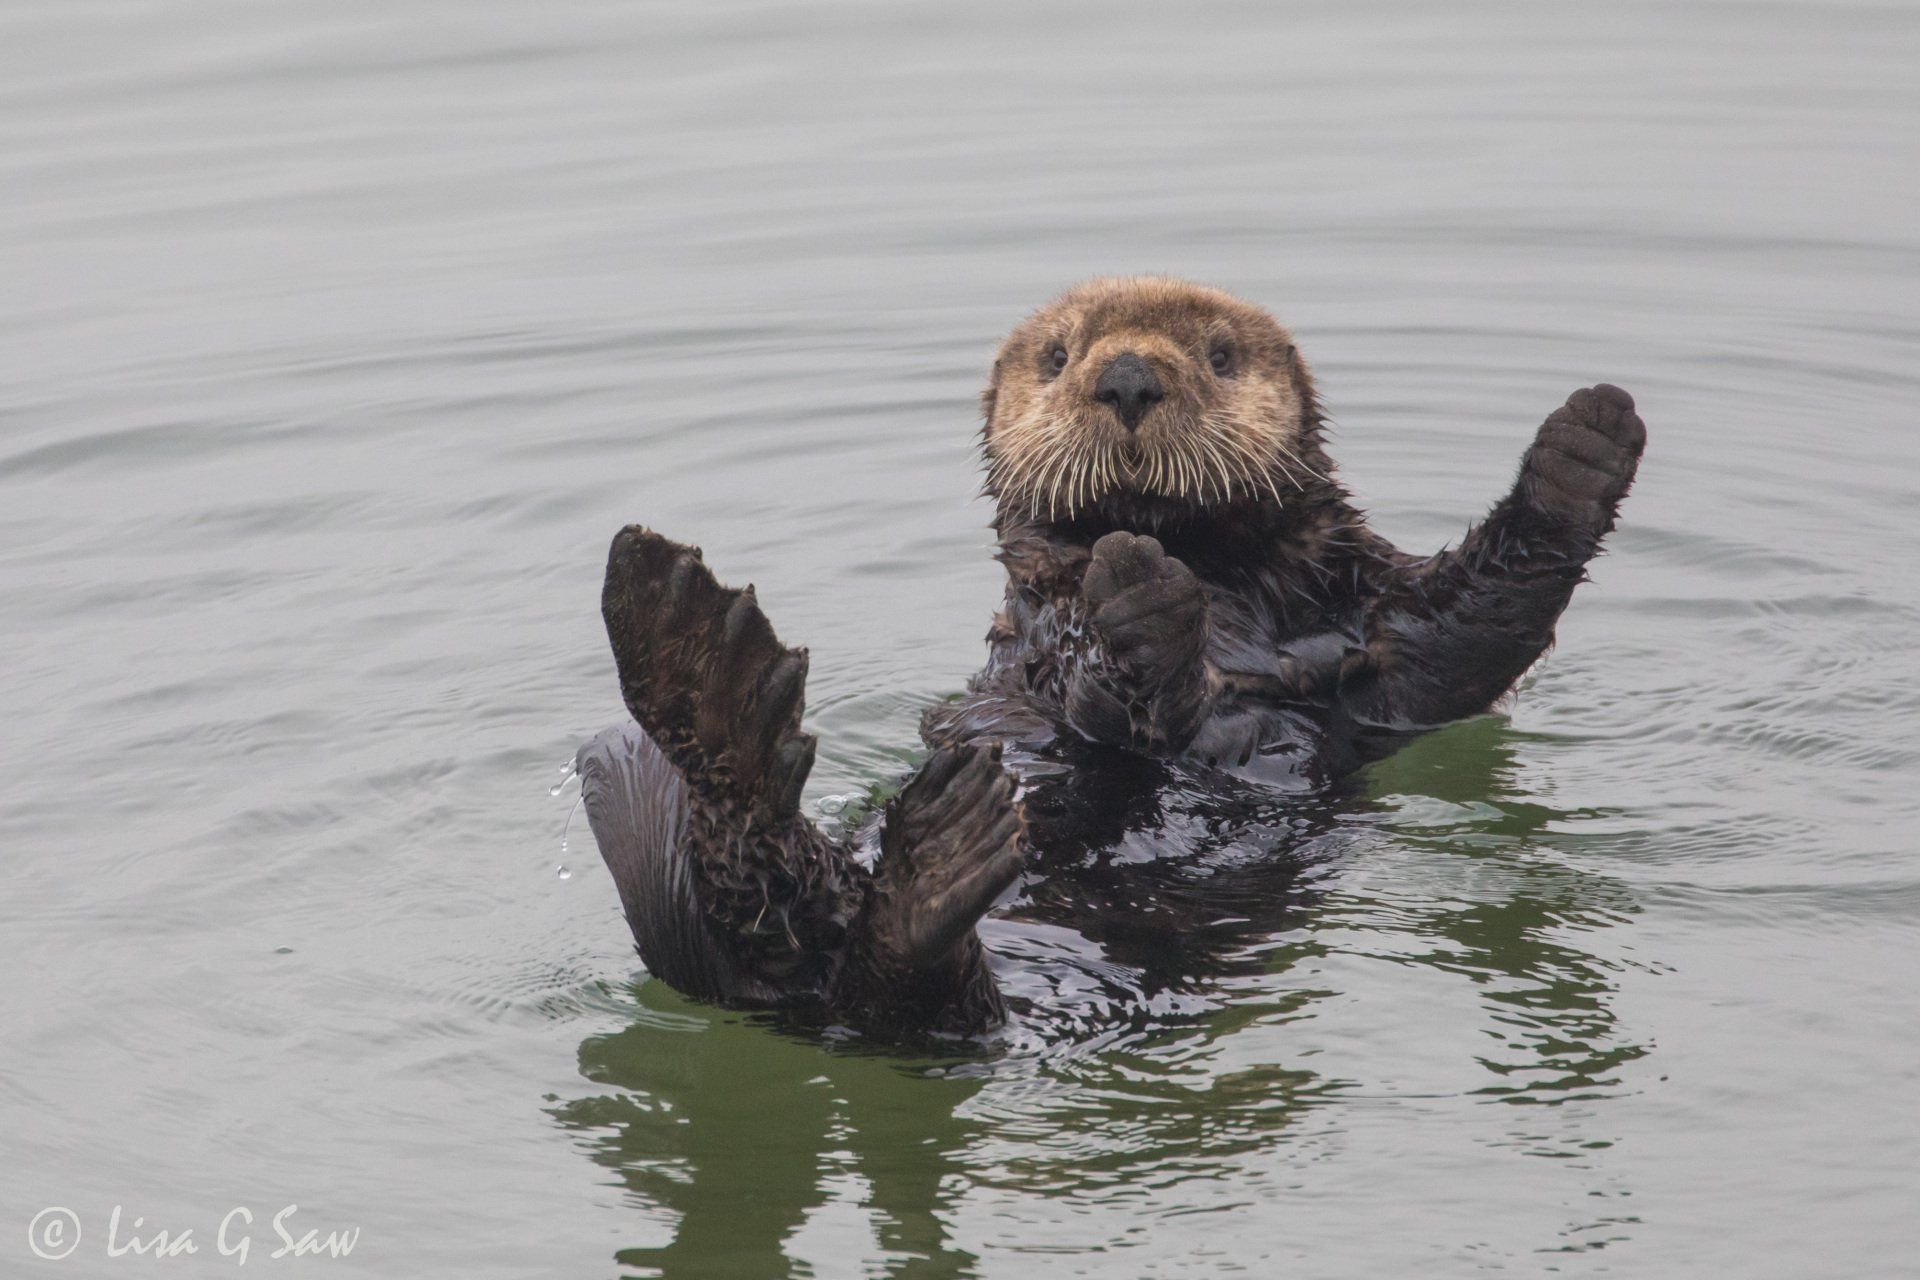 Sea Otter floating in water with paws and feet up in the air